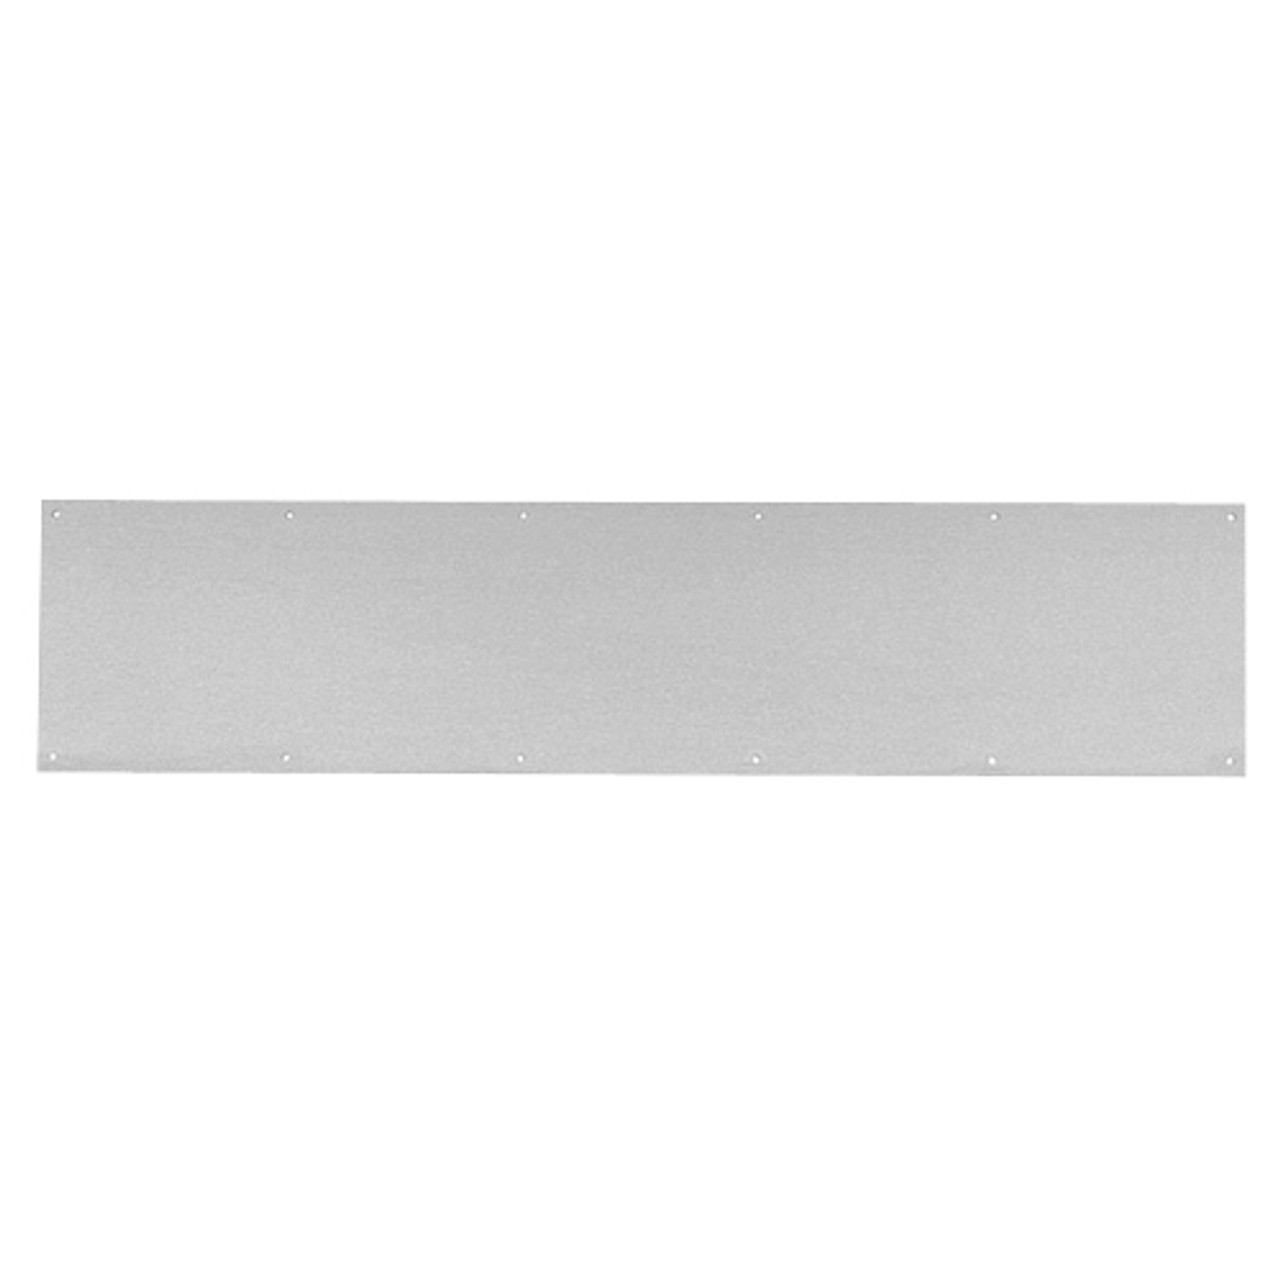 8400-US26D-4x20-B-CS Ives 8400 Series Protection Plate in Satin Chrome